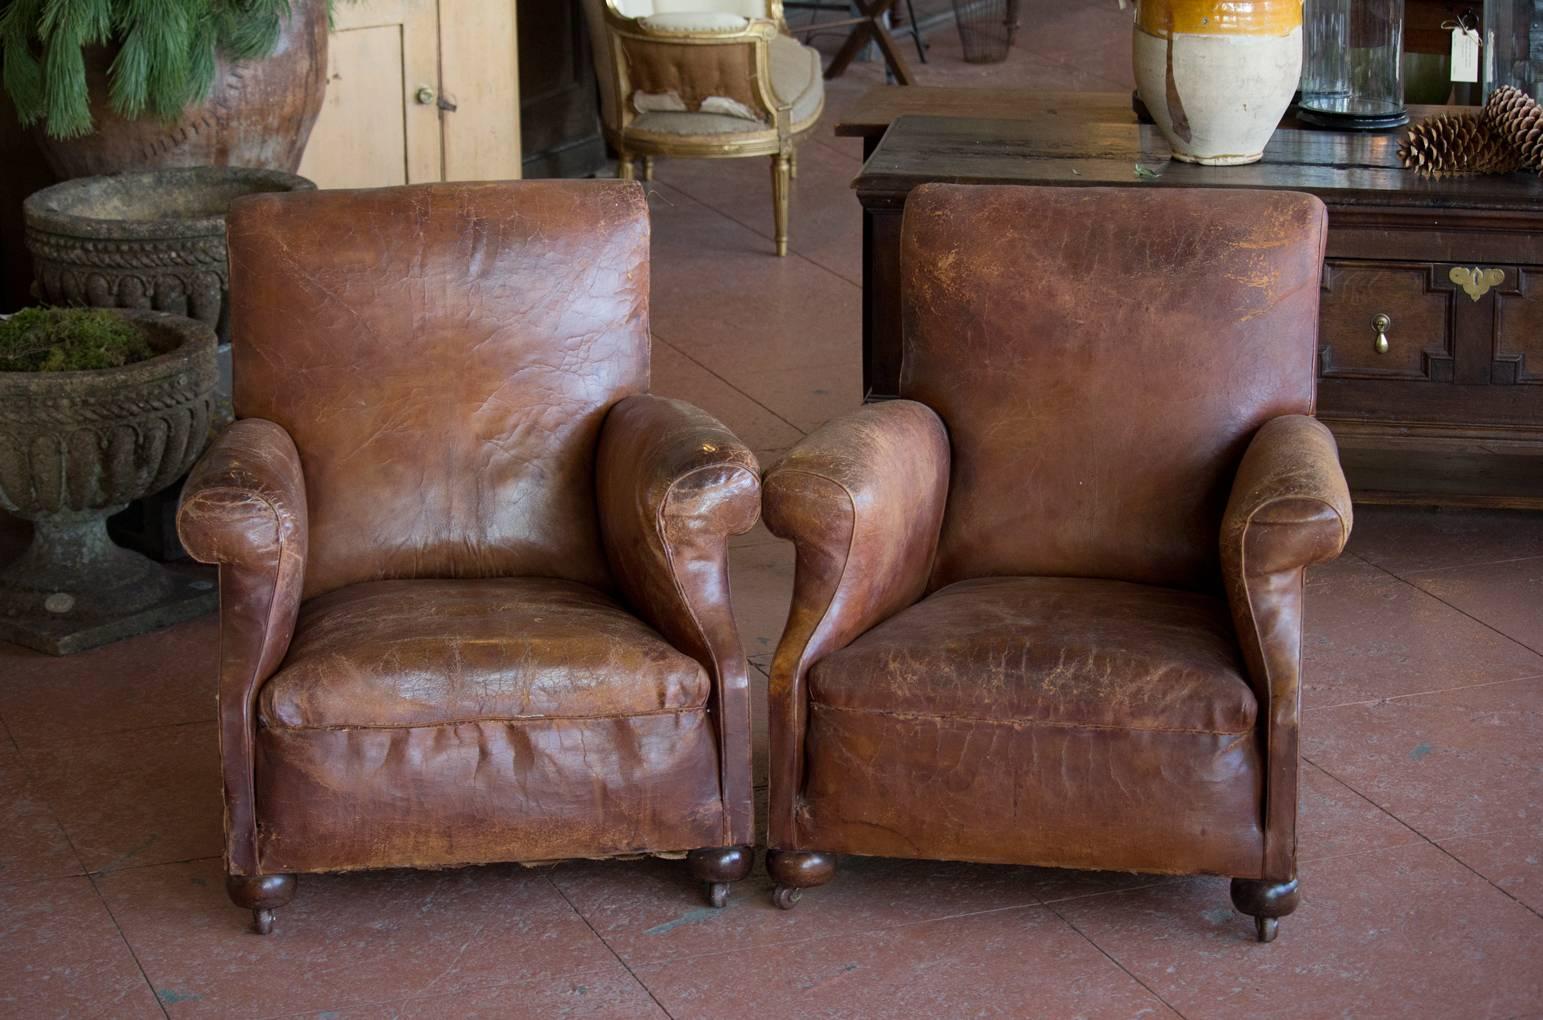 Pair of substantial English vintage leather club chairs with slight roll arm and back design. Each chair sits on front bun feet with four original casters. Just enough scruffiness to be totally chic and charming!